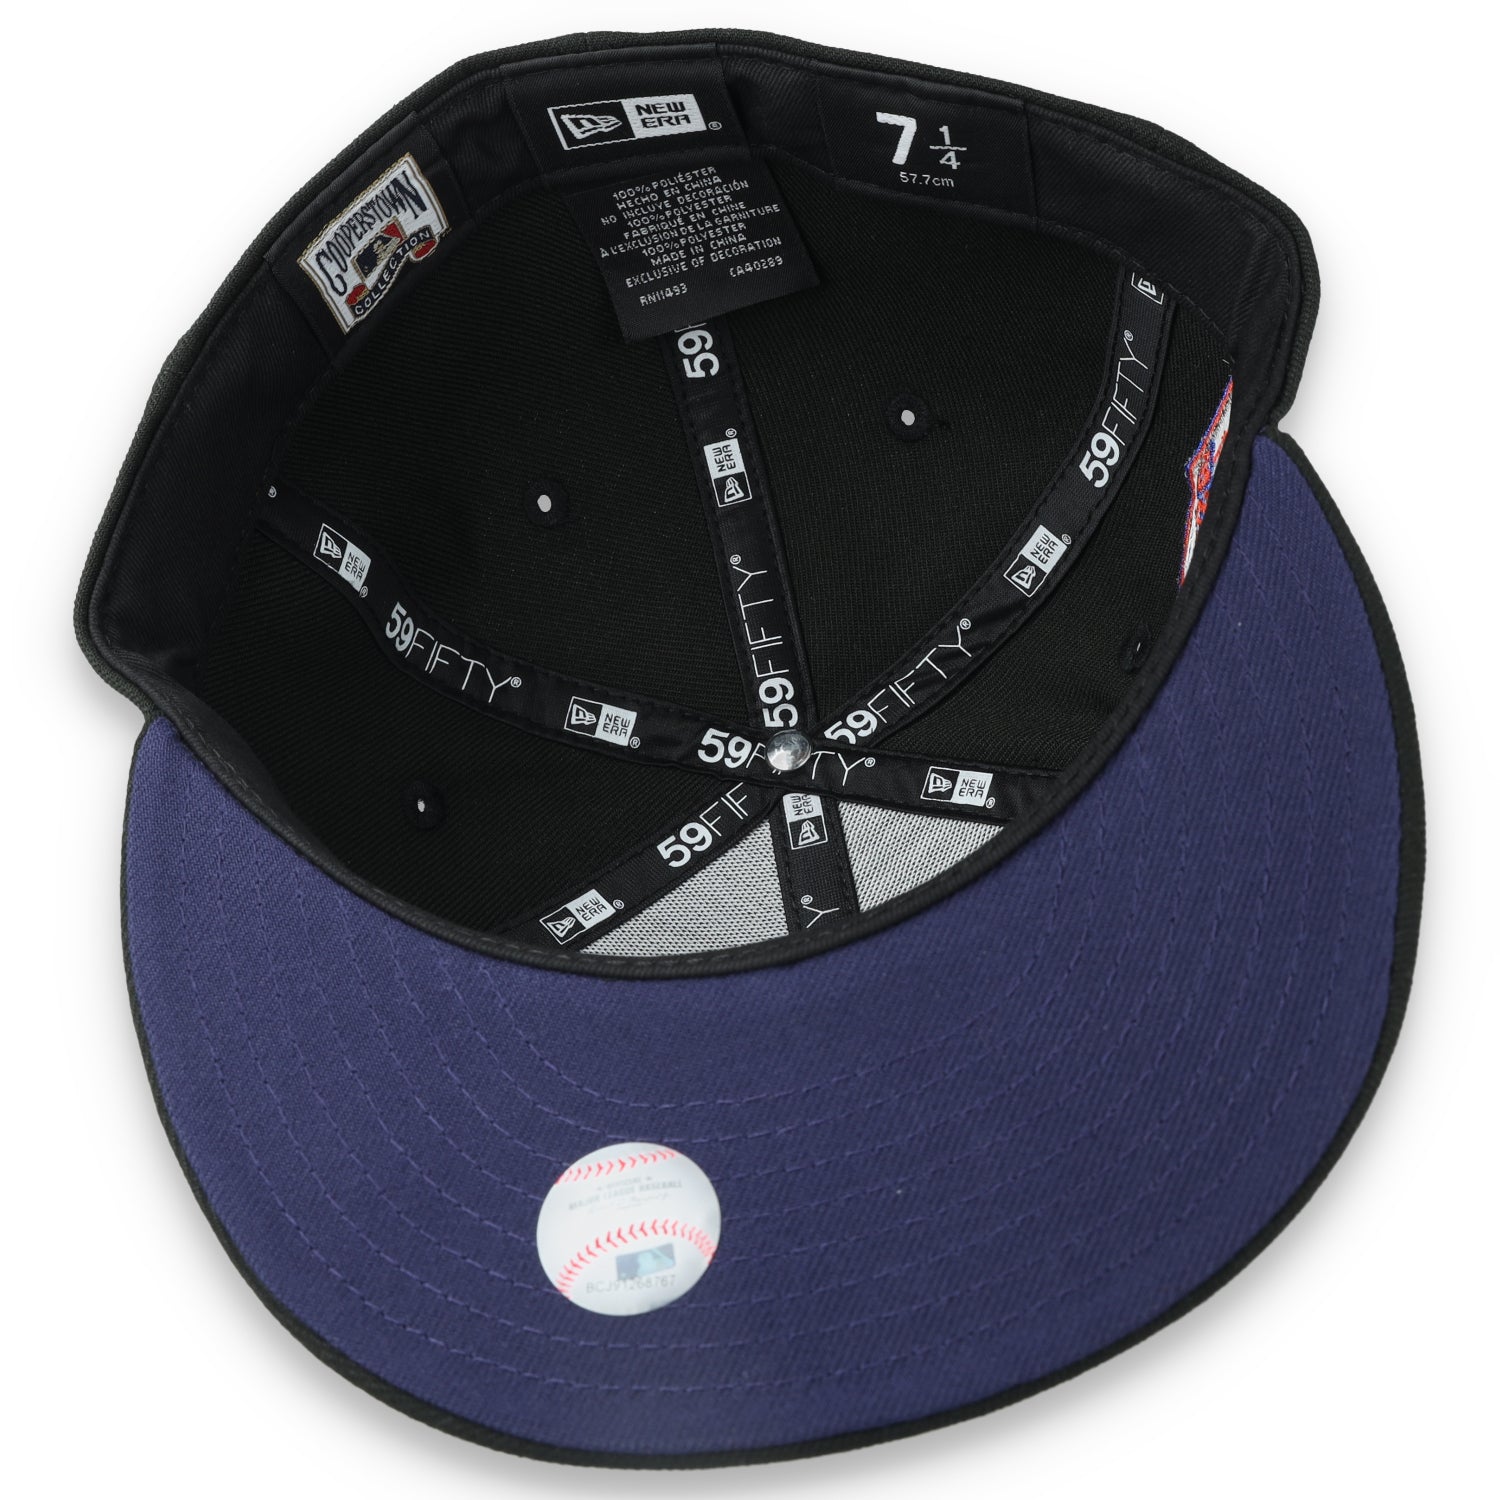 New Era Houston Texas 50th Anniversary Side Patch 59FIFTY Fitted Hat-Metallic Grey/Black